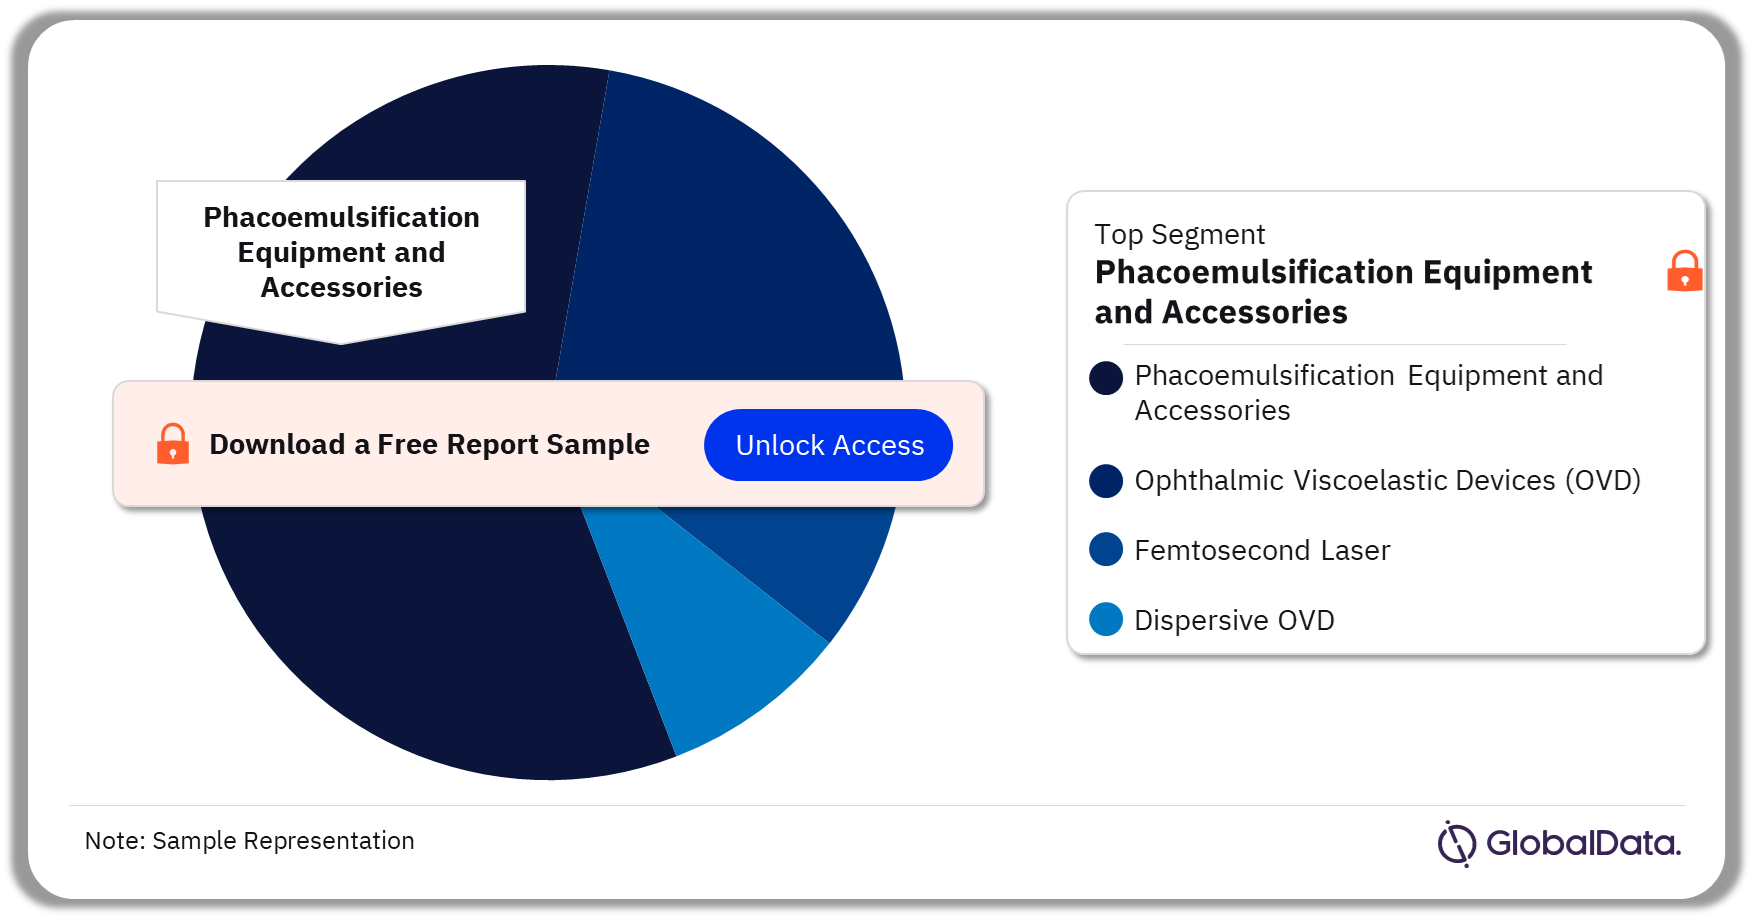 Cataract Surgery Devices Pipeline Market Analysis by Segments, 2023 (%)